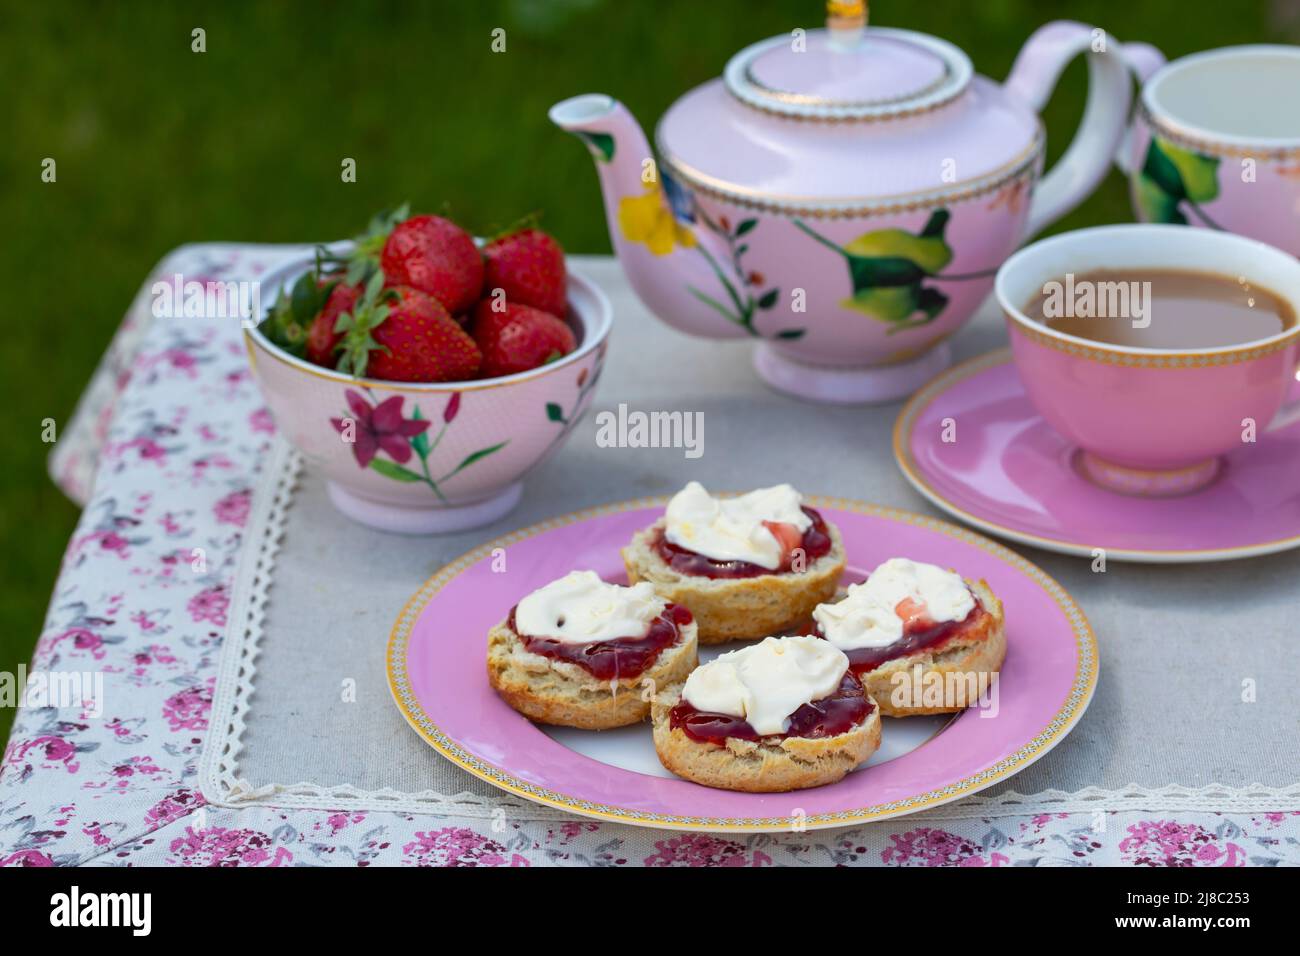 Freshly baked scones with tea served in the garden Stock Photo